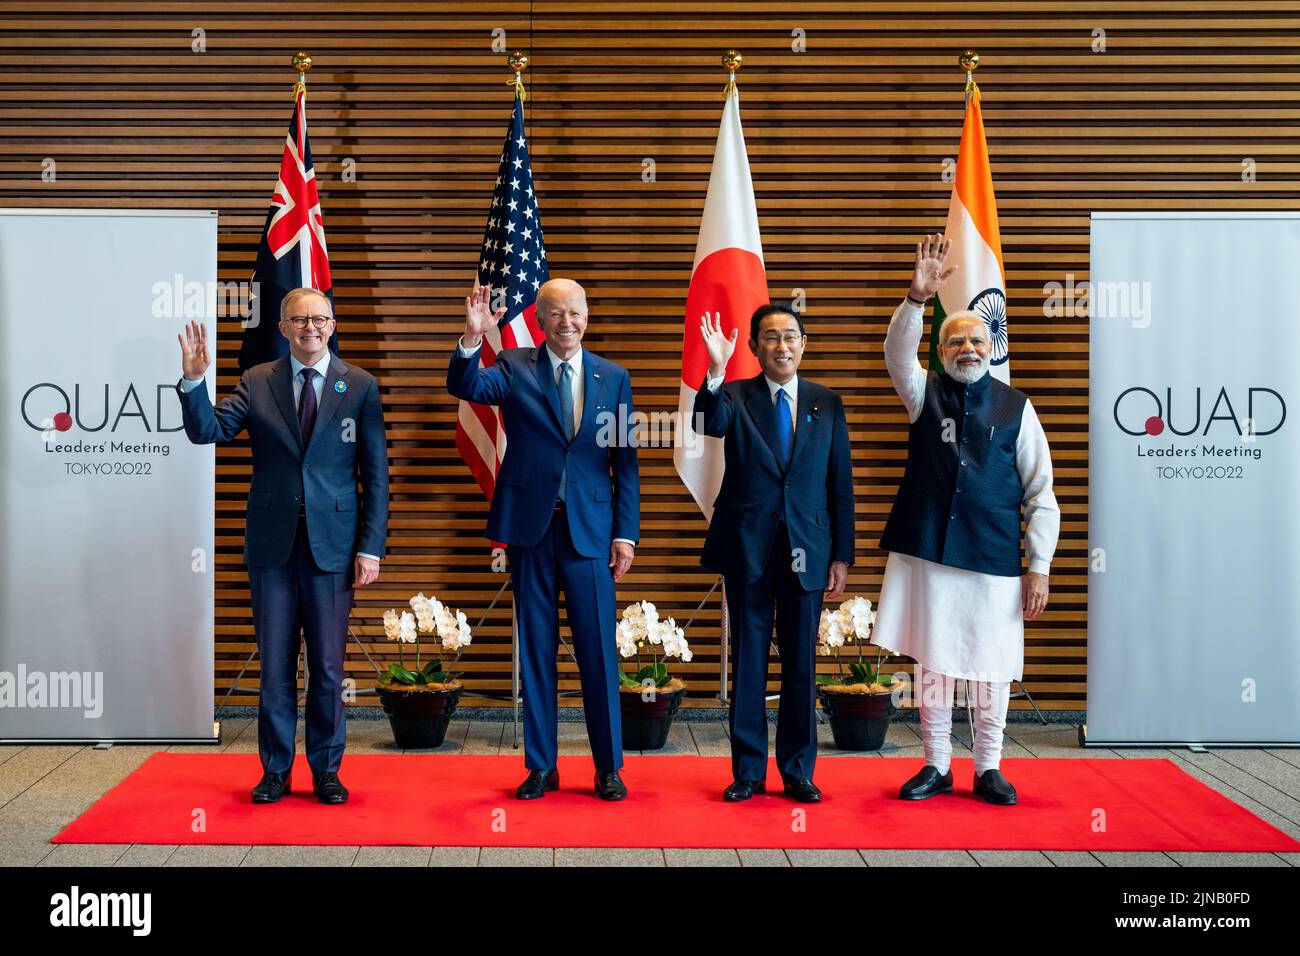 Tokyo, Japan. 24 May, 2022. Leaders of Quad stand together from left, Australian Prime Minister Anthony Albanese, U.S. President Joe Biden, Japanese Prime Minister Fumio Kishida, and Indian Prime Minister Narendra Modi, at the entrance hall of the Prime Minister Office, May 24, 2022, in Tokyo, Japan.  Credit: Cameron Smith/U.S. State Department/Alamy Live News Stock Photo